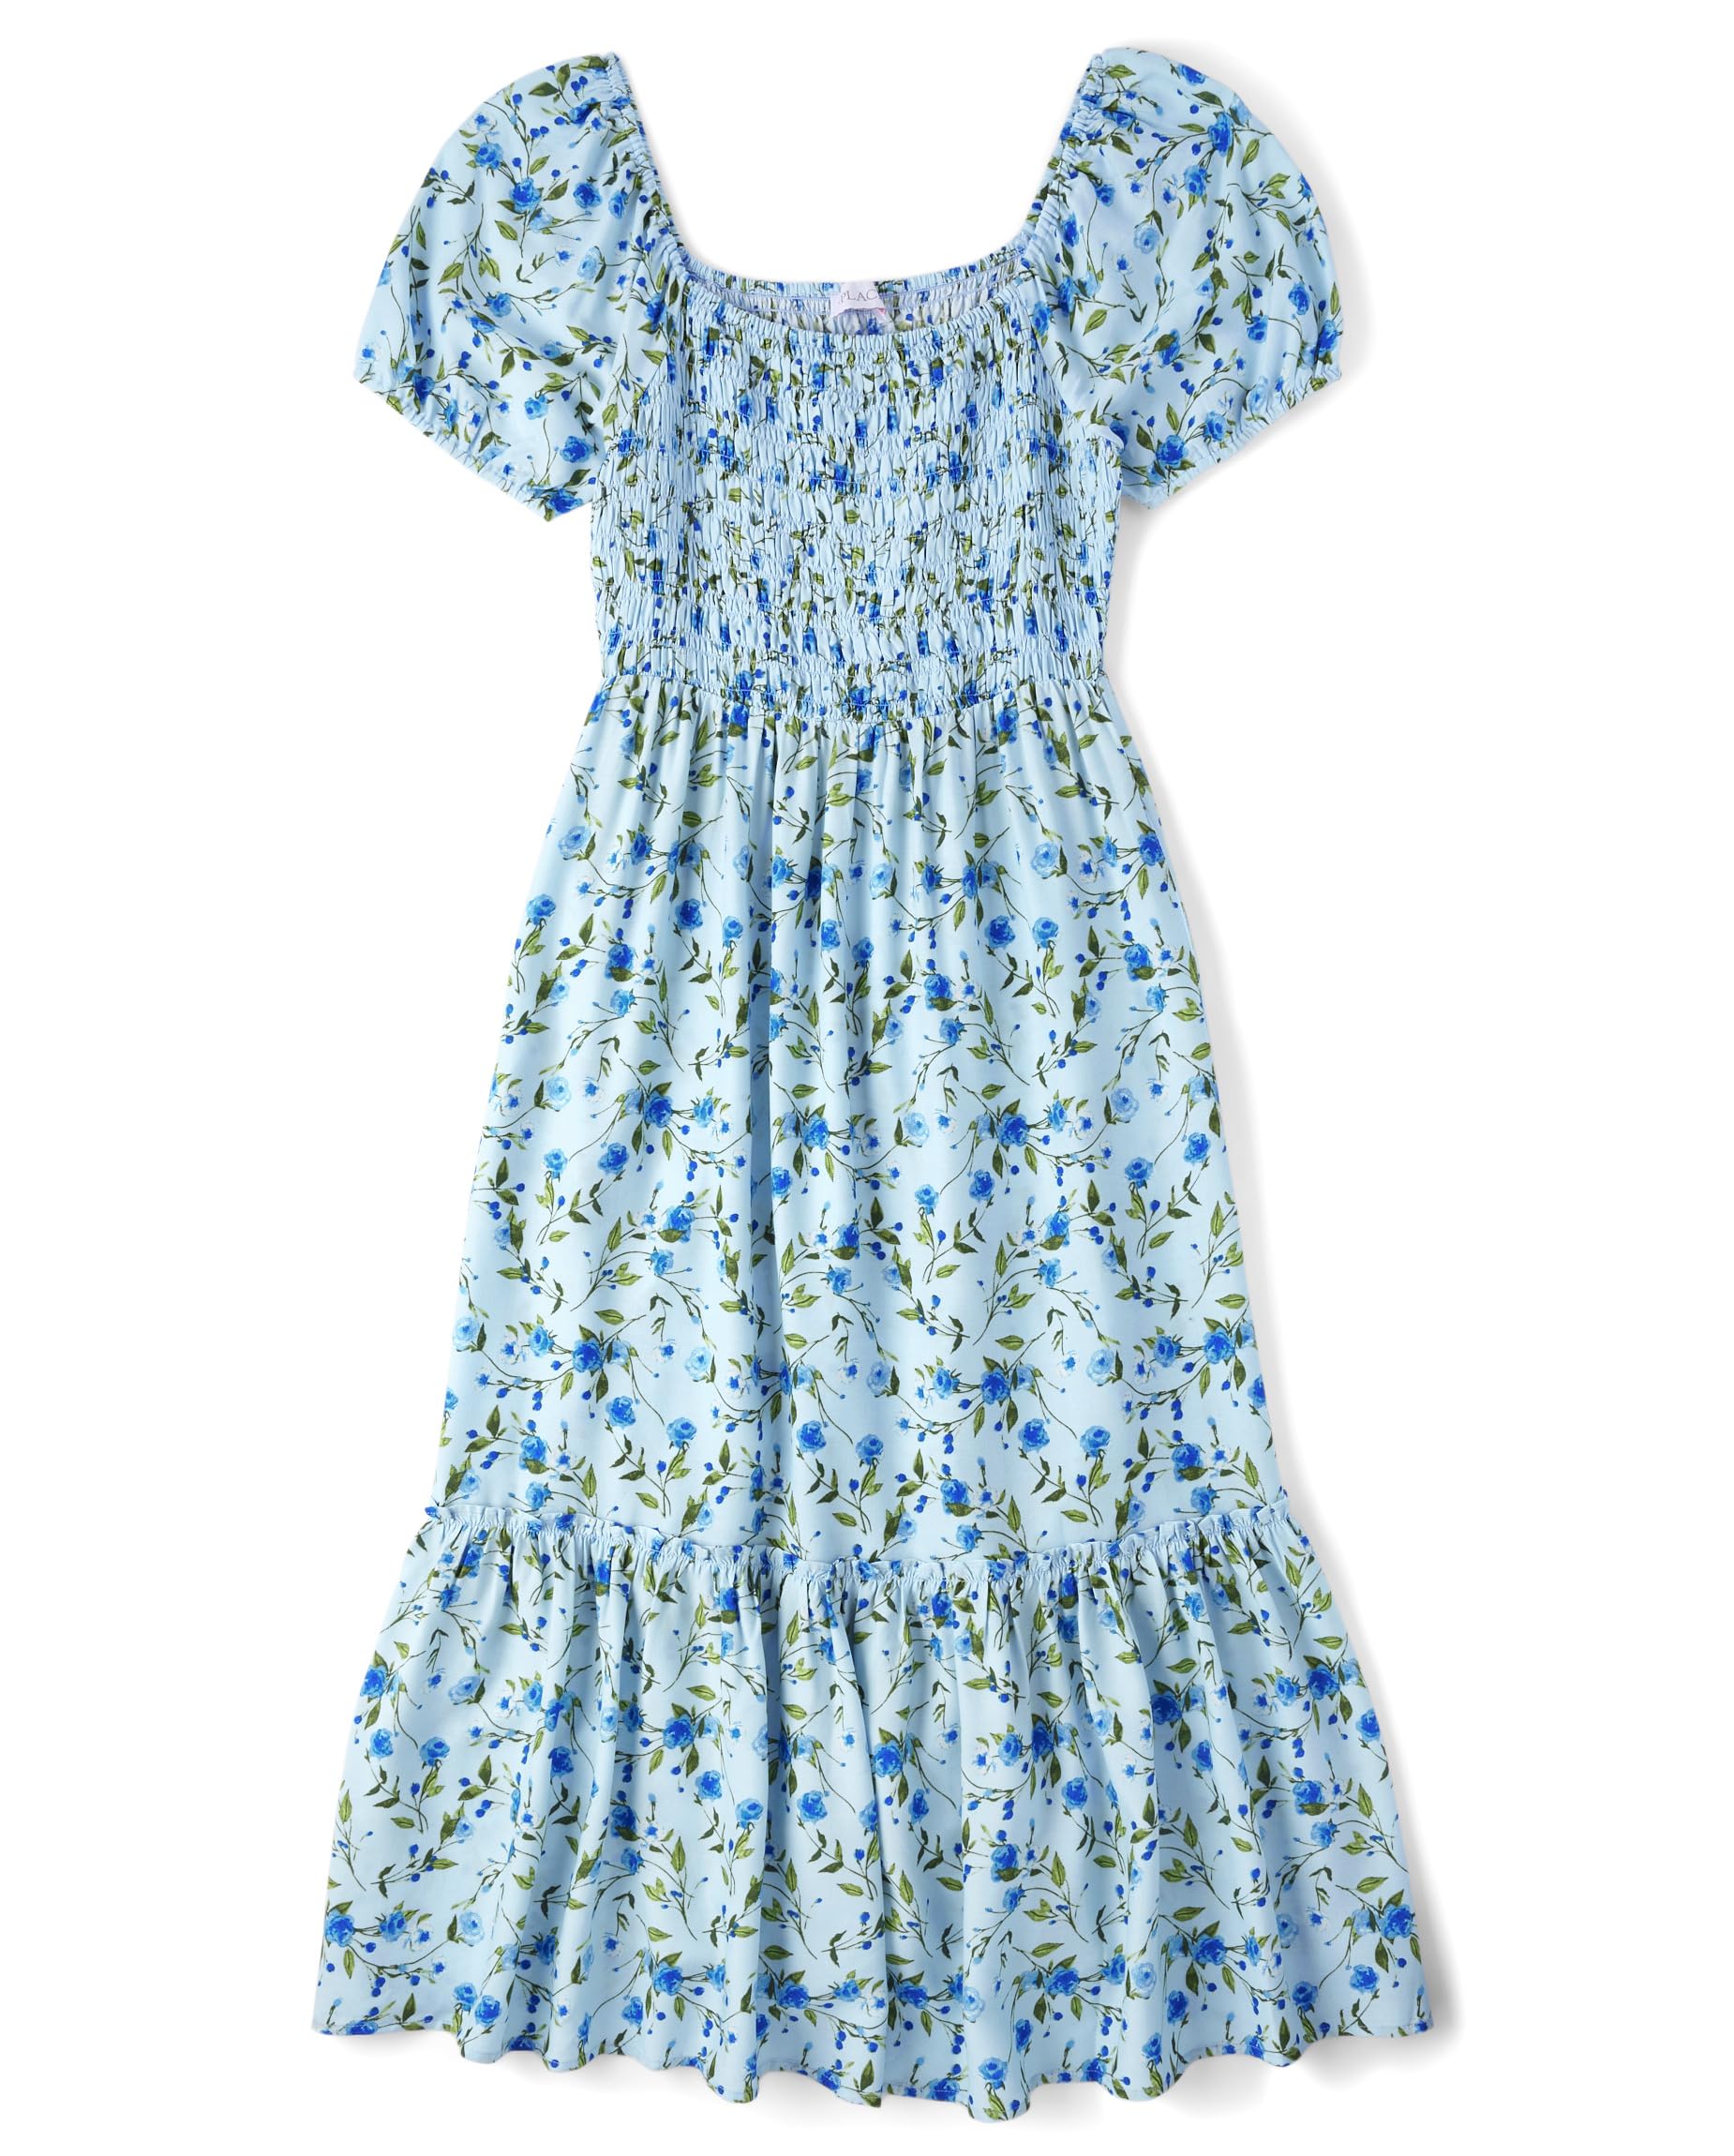 The Children's Place Women's Mommy and Me Matching Short Sleeve Dresses